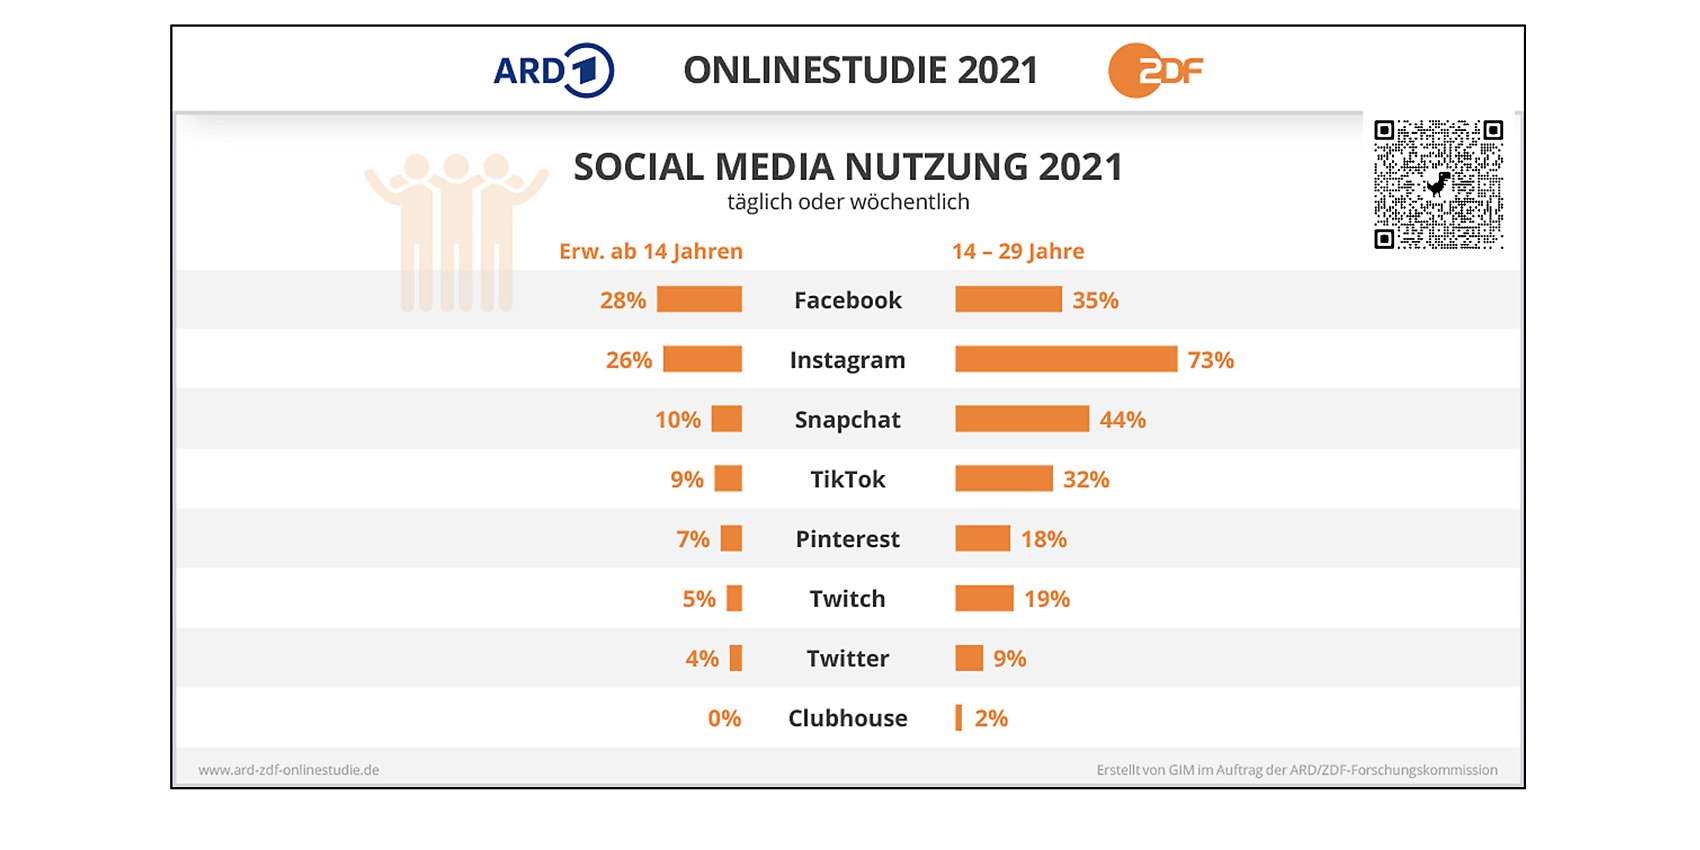 Infographic from the ARD-ZDF Online Study 2021, ARD/ZDF-Onlinestudie 2021